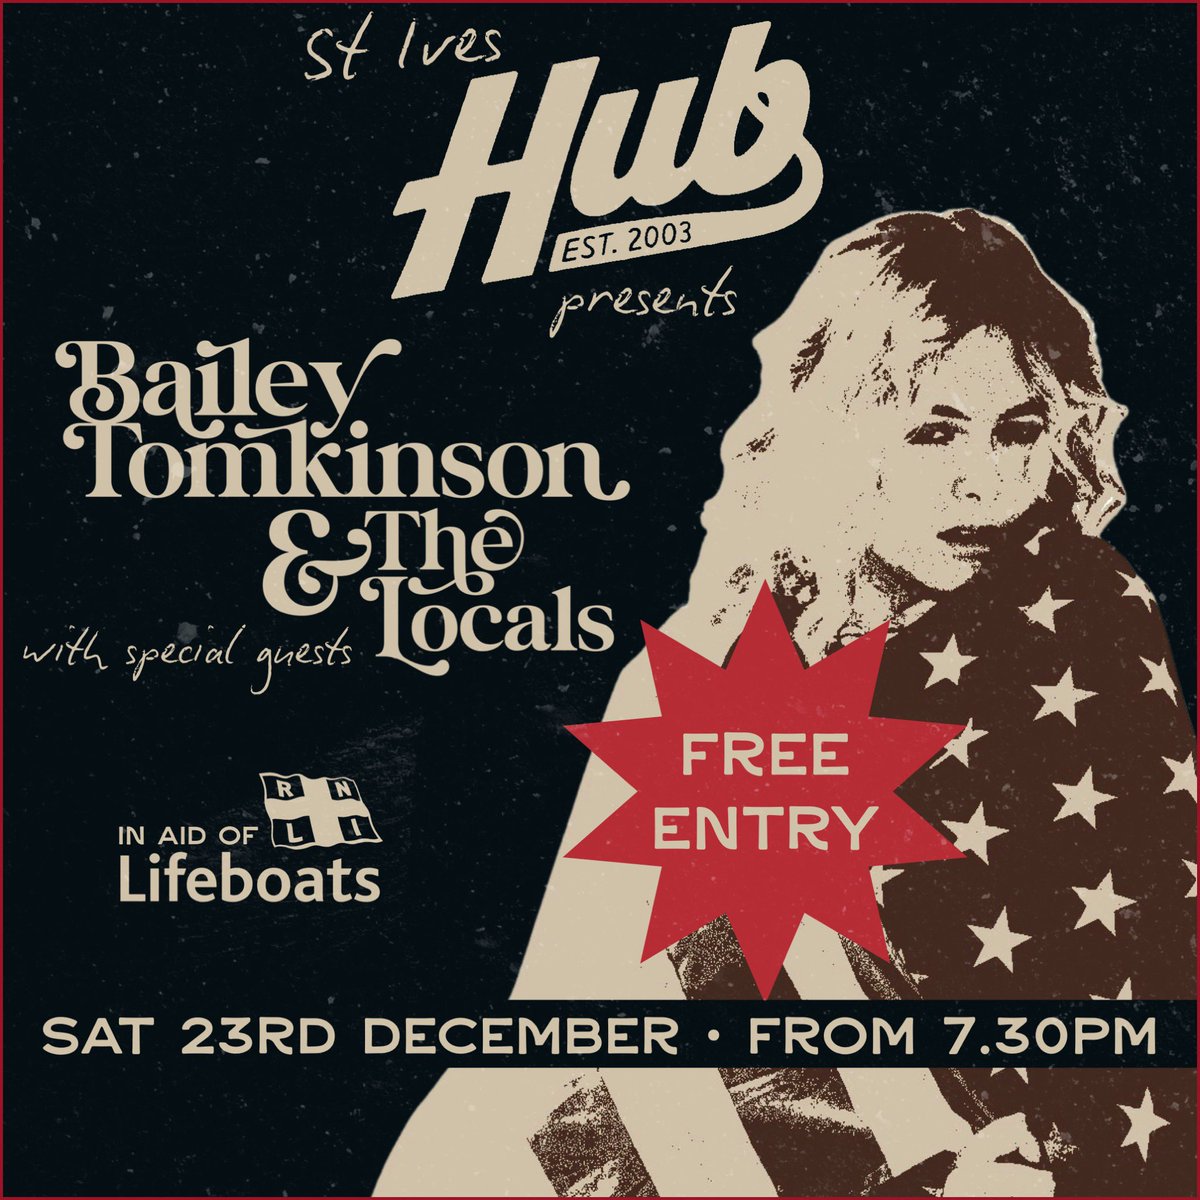 Stoked to announce that Bailey Tomkinson & The Locals will be performing at @HubboxSW in St Ives on Dec 23rd! ❄️🤠 To secure your FREE ENTRY head to baileytomkinson.com/hubtickets We’ll be raising funds in aid of the @RNLI #stives #cornwall #christmas